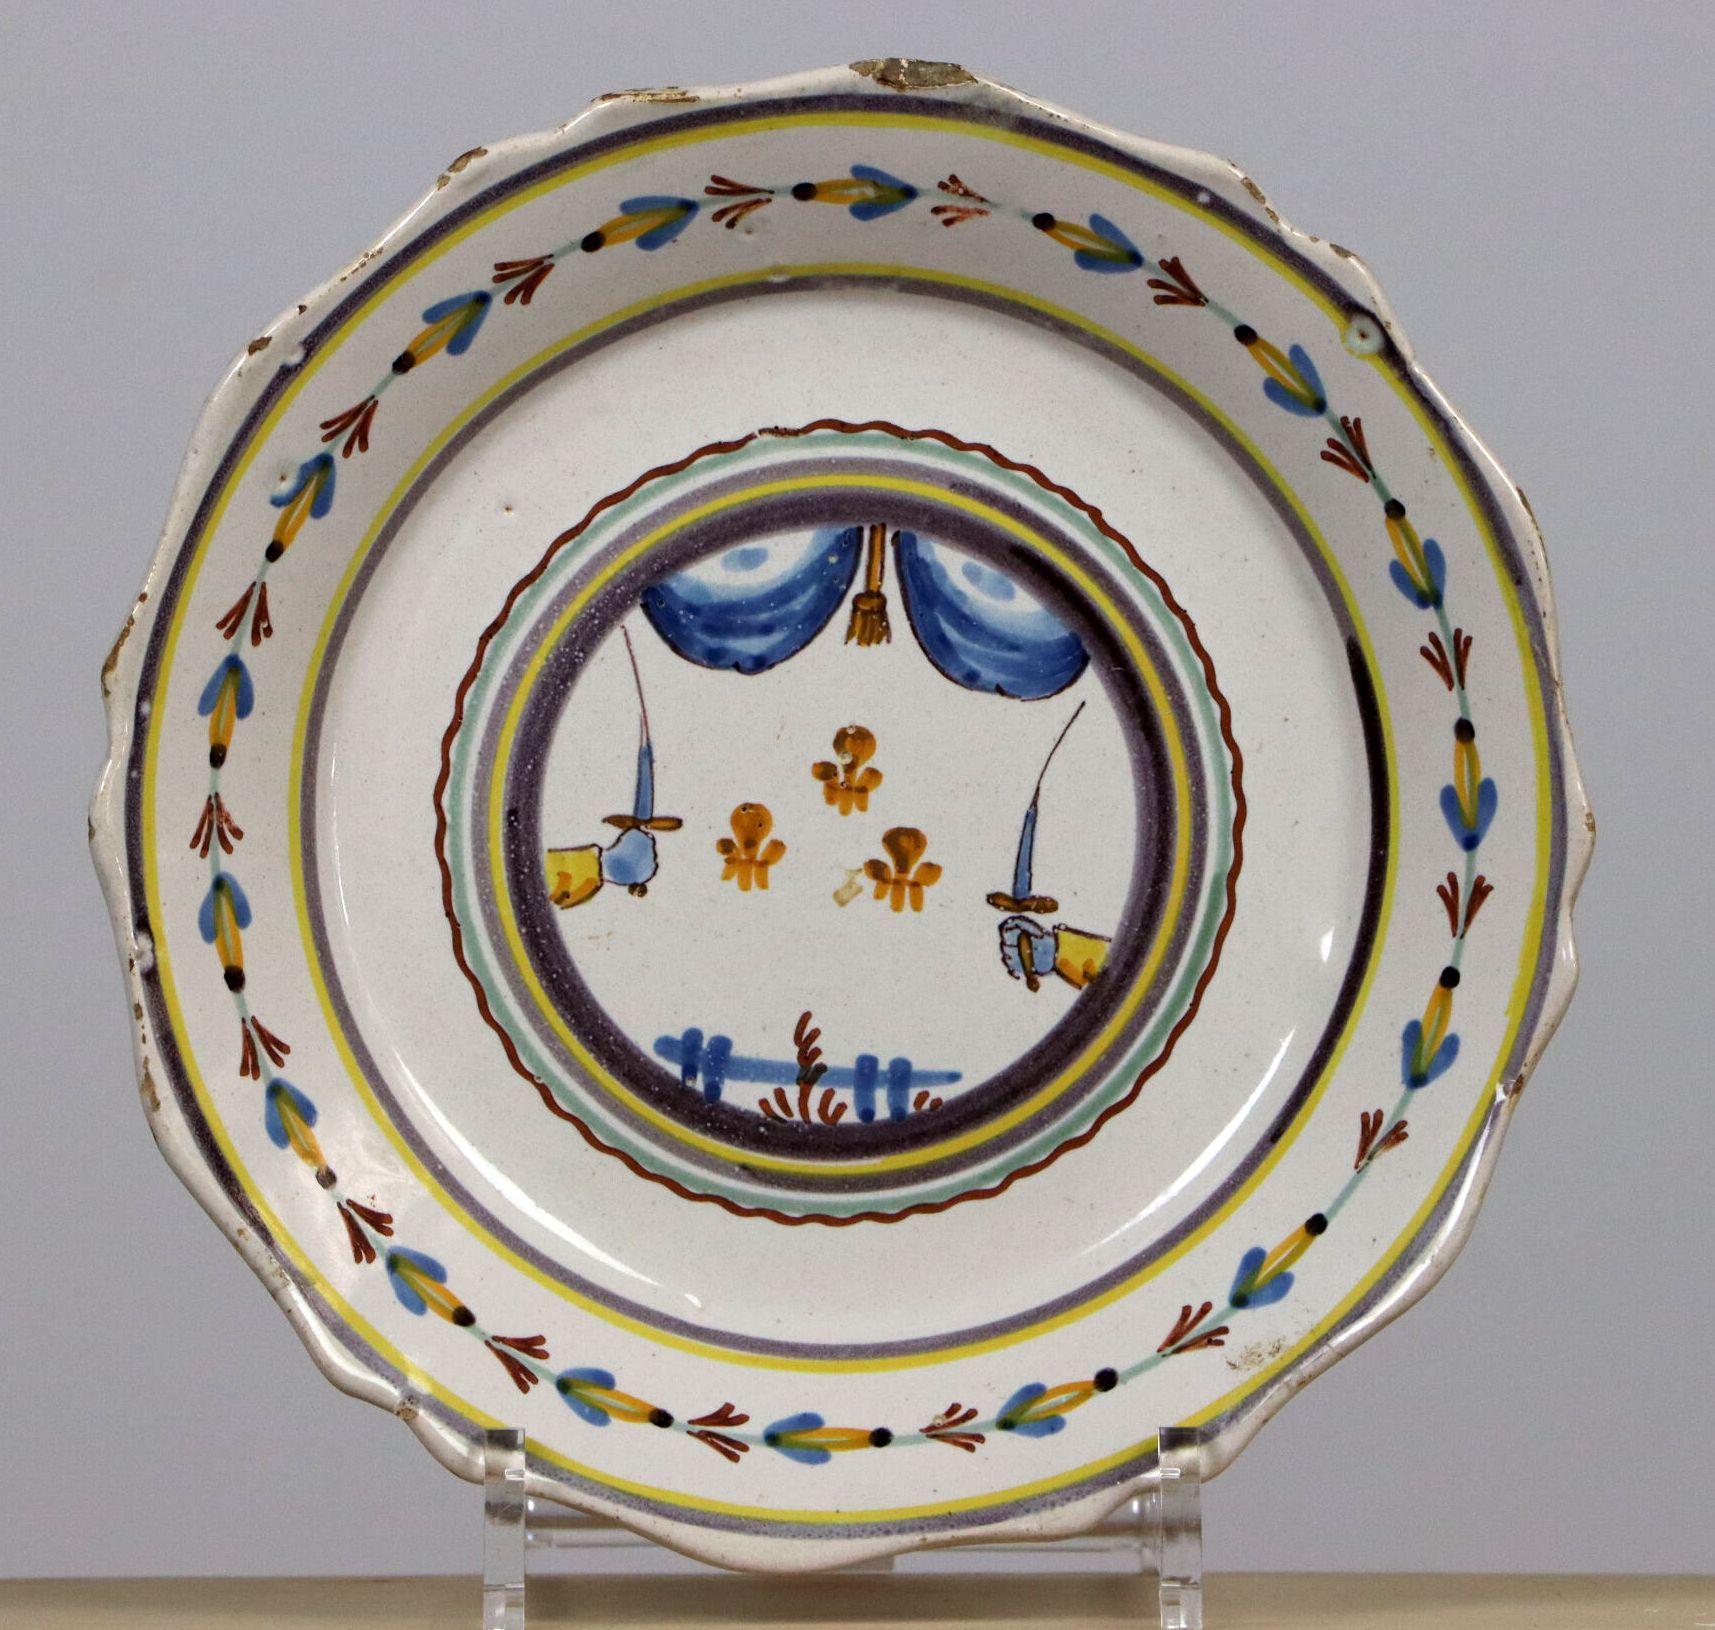 Null NEVERS.
Earthenware plate with revolutionary polychrome decoration of the o&hellip;